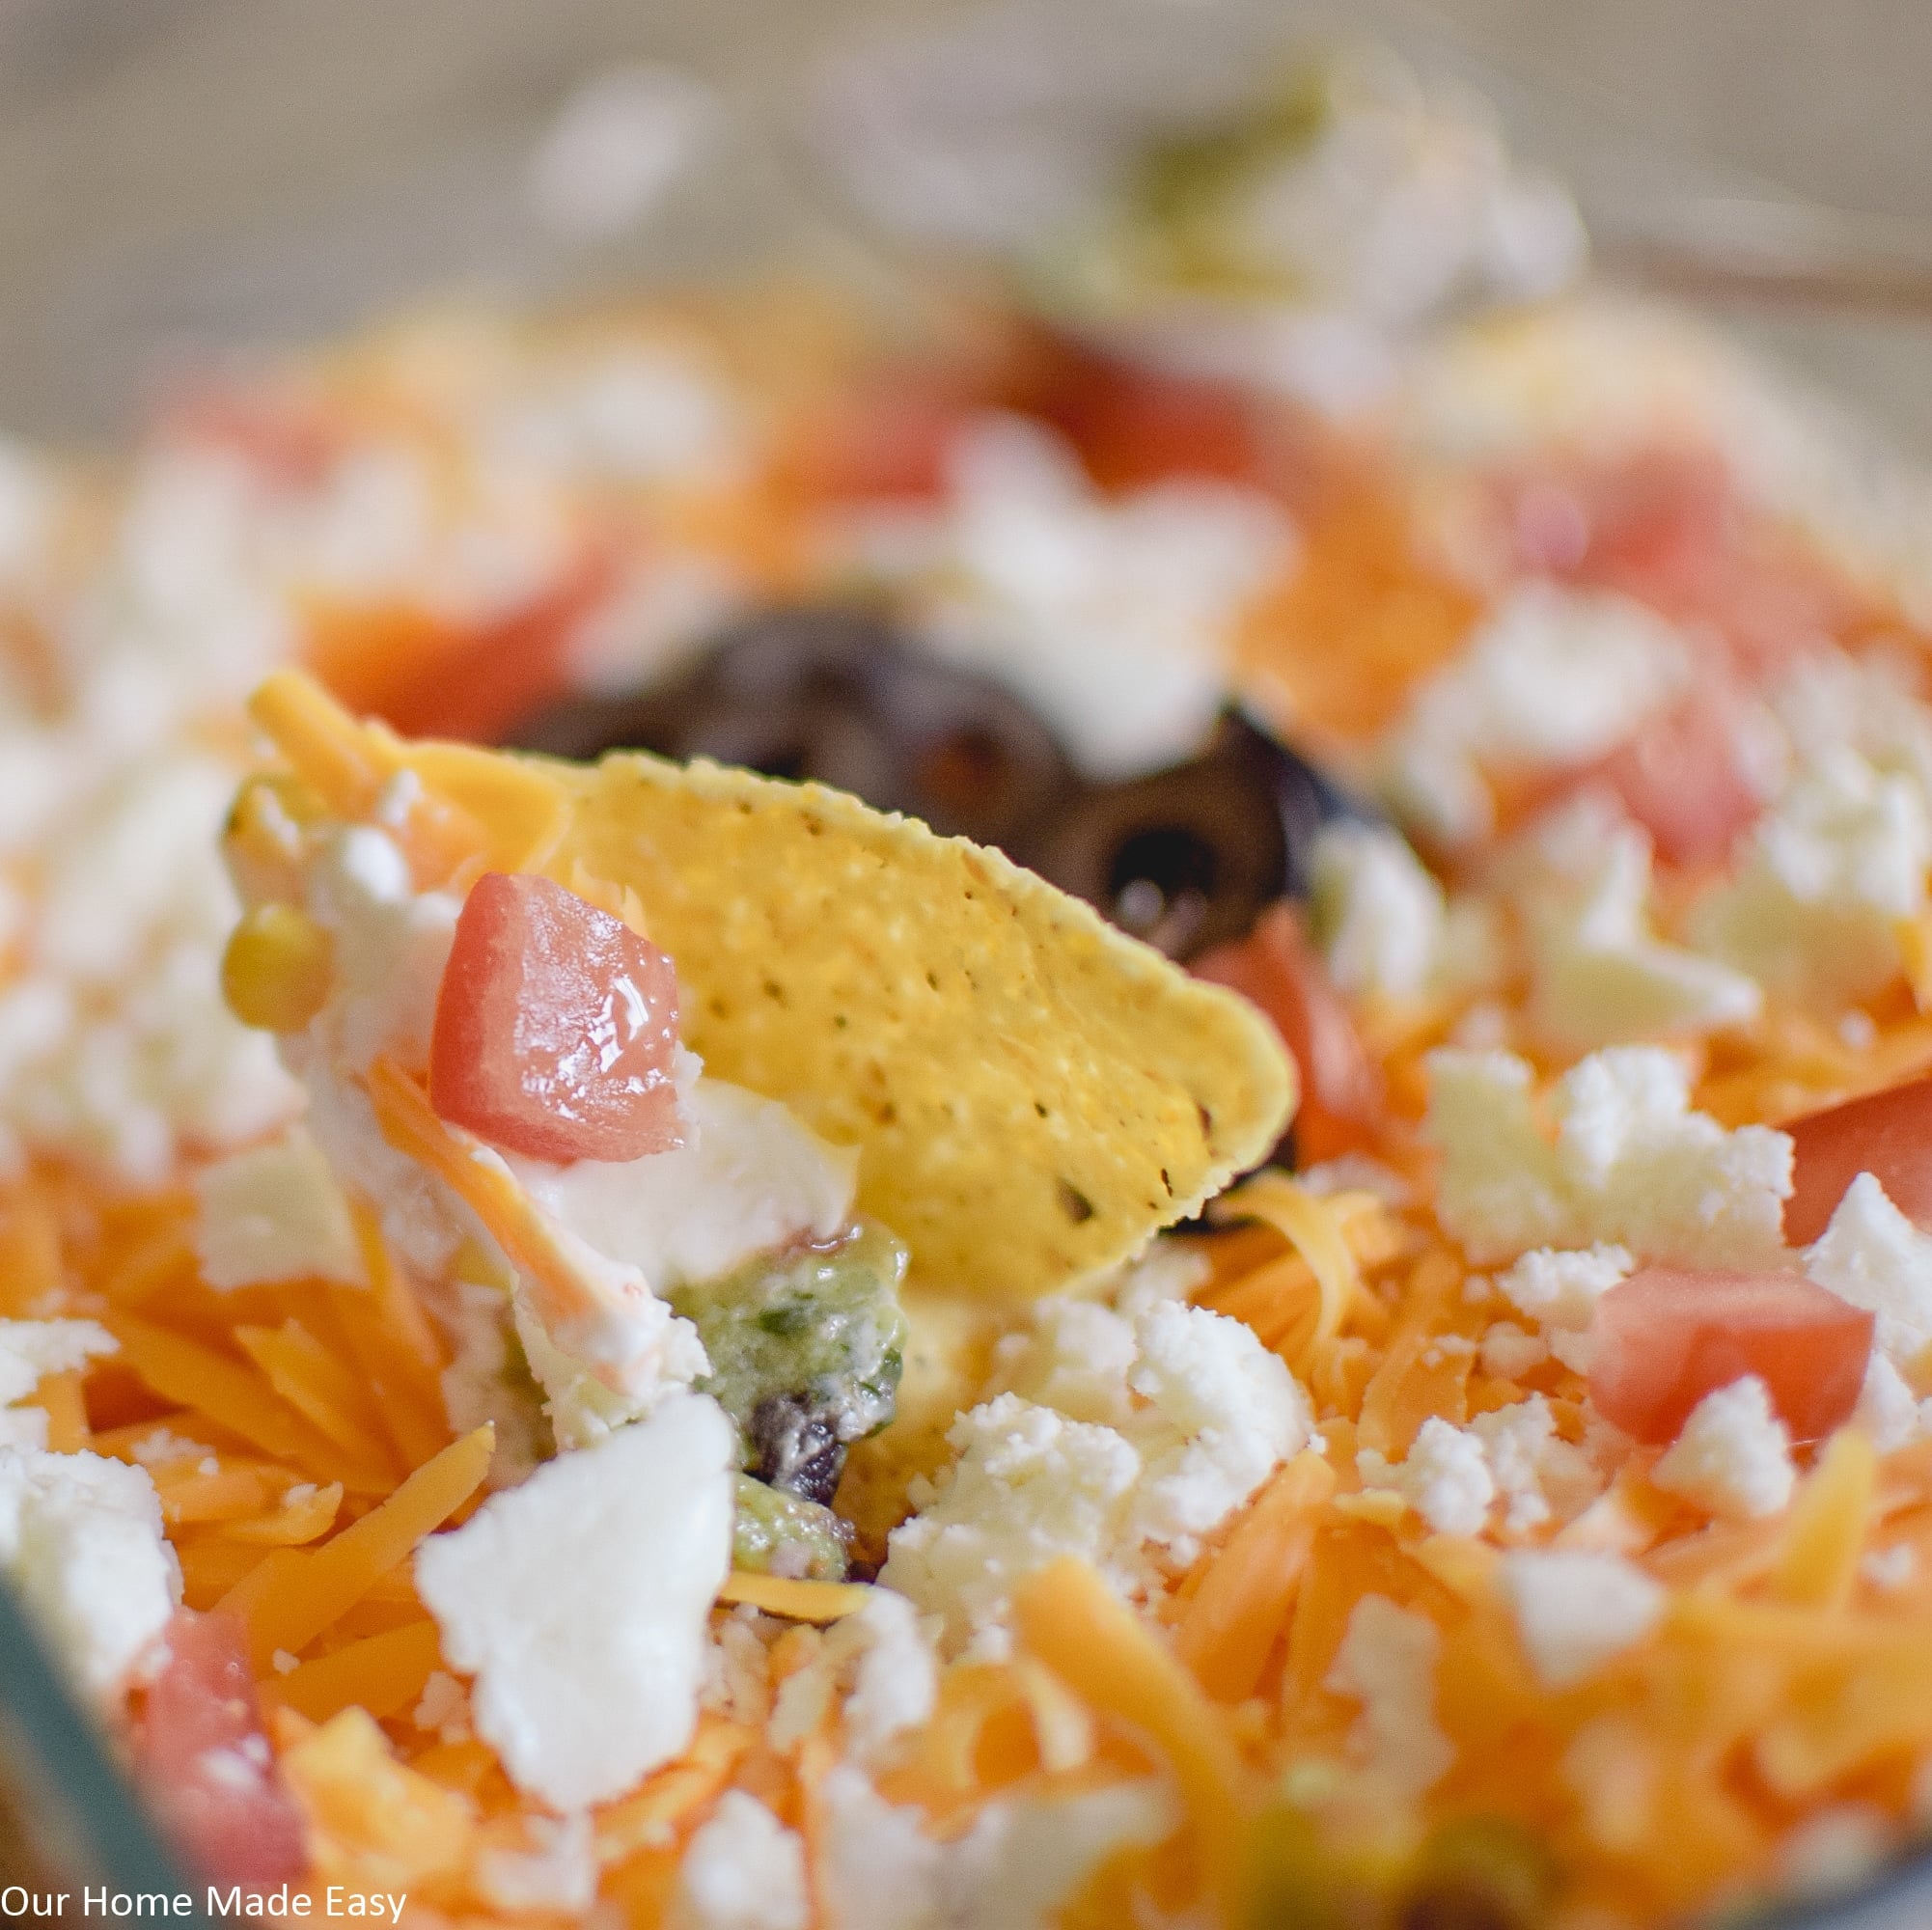 this easy 7 layer taco dip is perfect for parties - the whole crowd will enjoy it